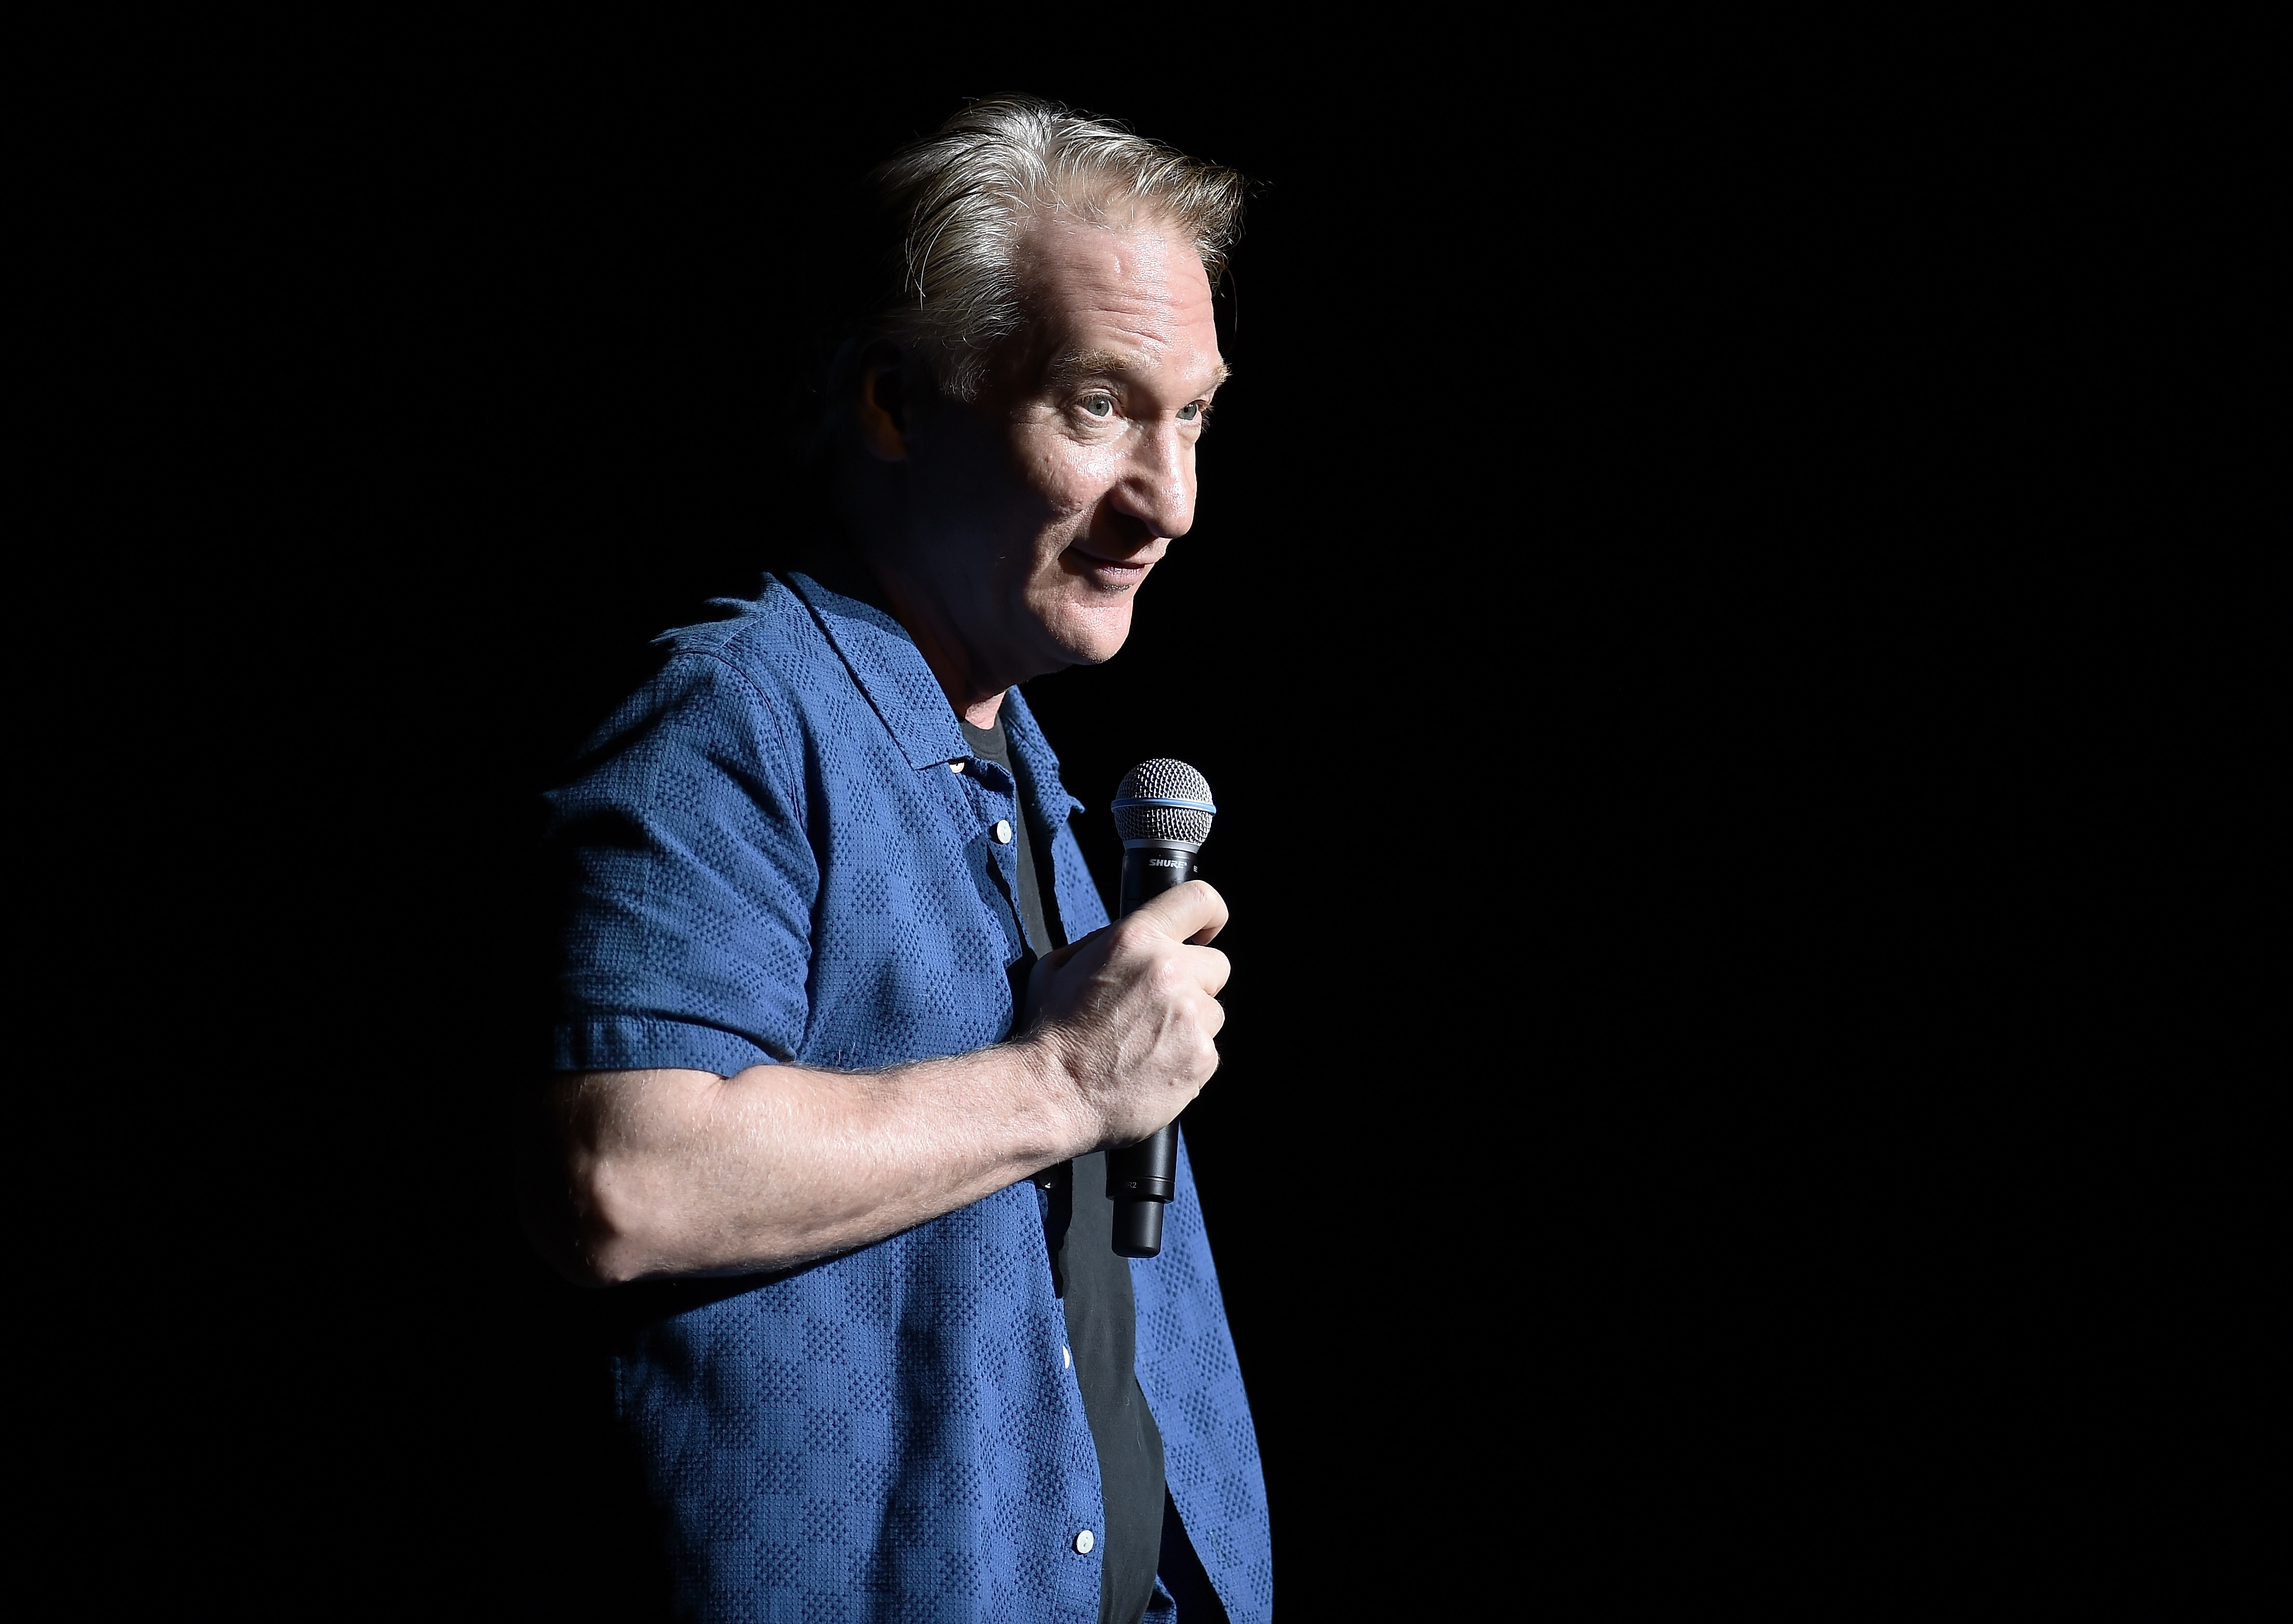 Bill Maher Performs During New York Comedy Festival at The Theater at Madison Square Garden on Nov. 5, 2016 in New York City. (Nicholas Hunt—Getty Images)